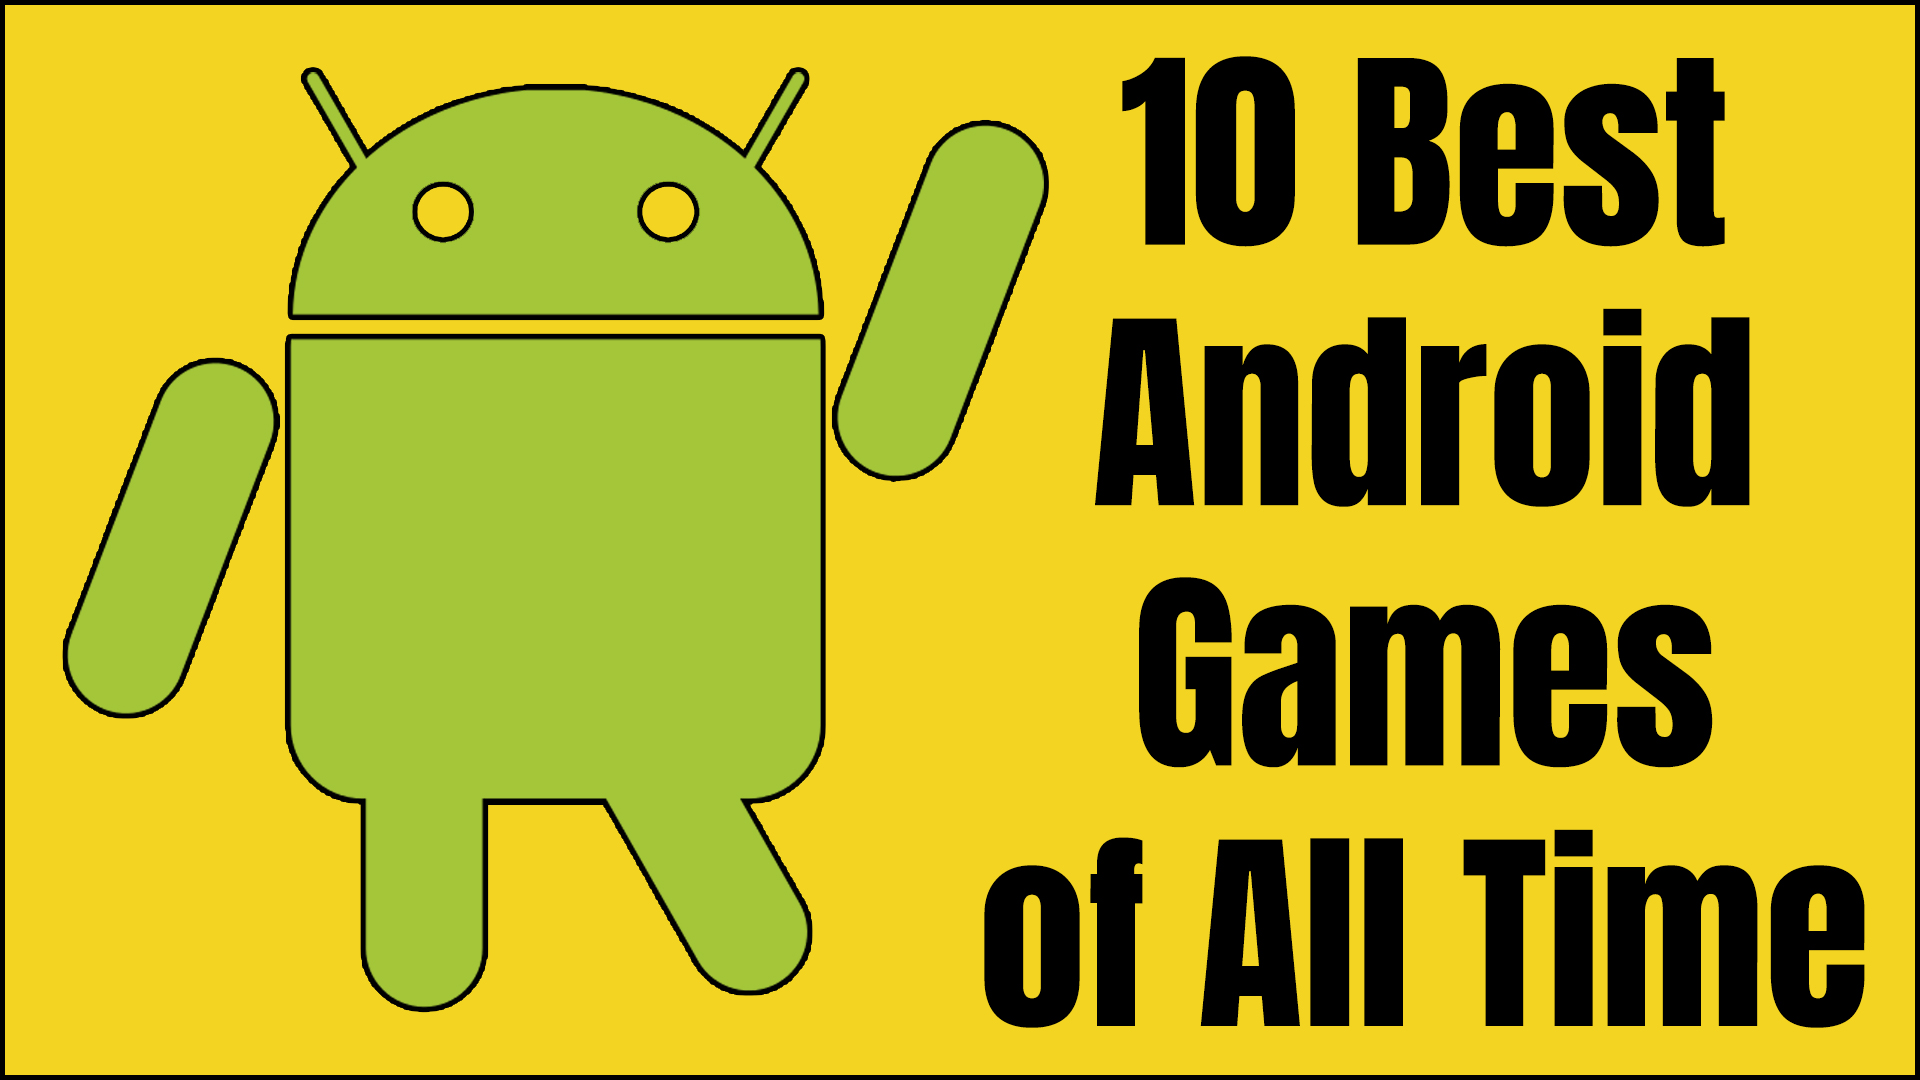 10 Best Android Games of All Time